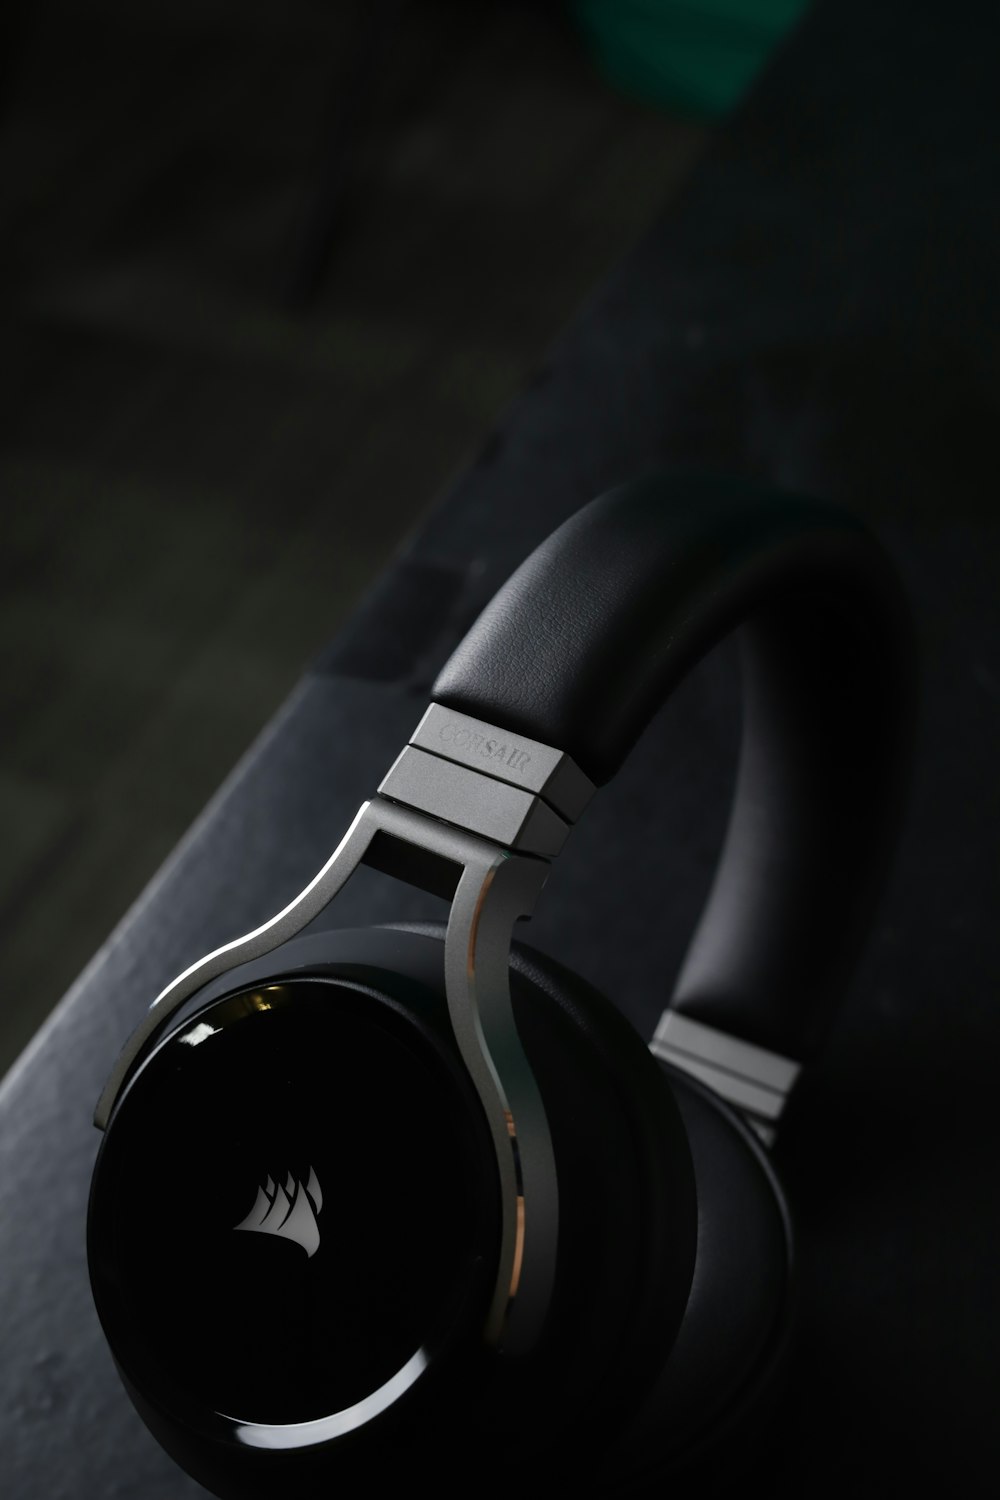 black and silver headphones on black surface